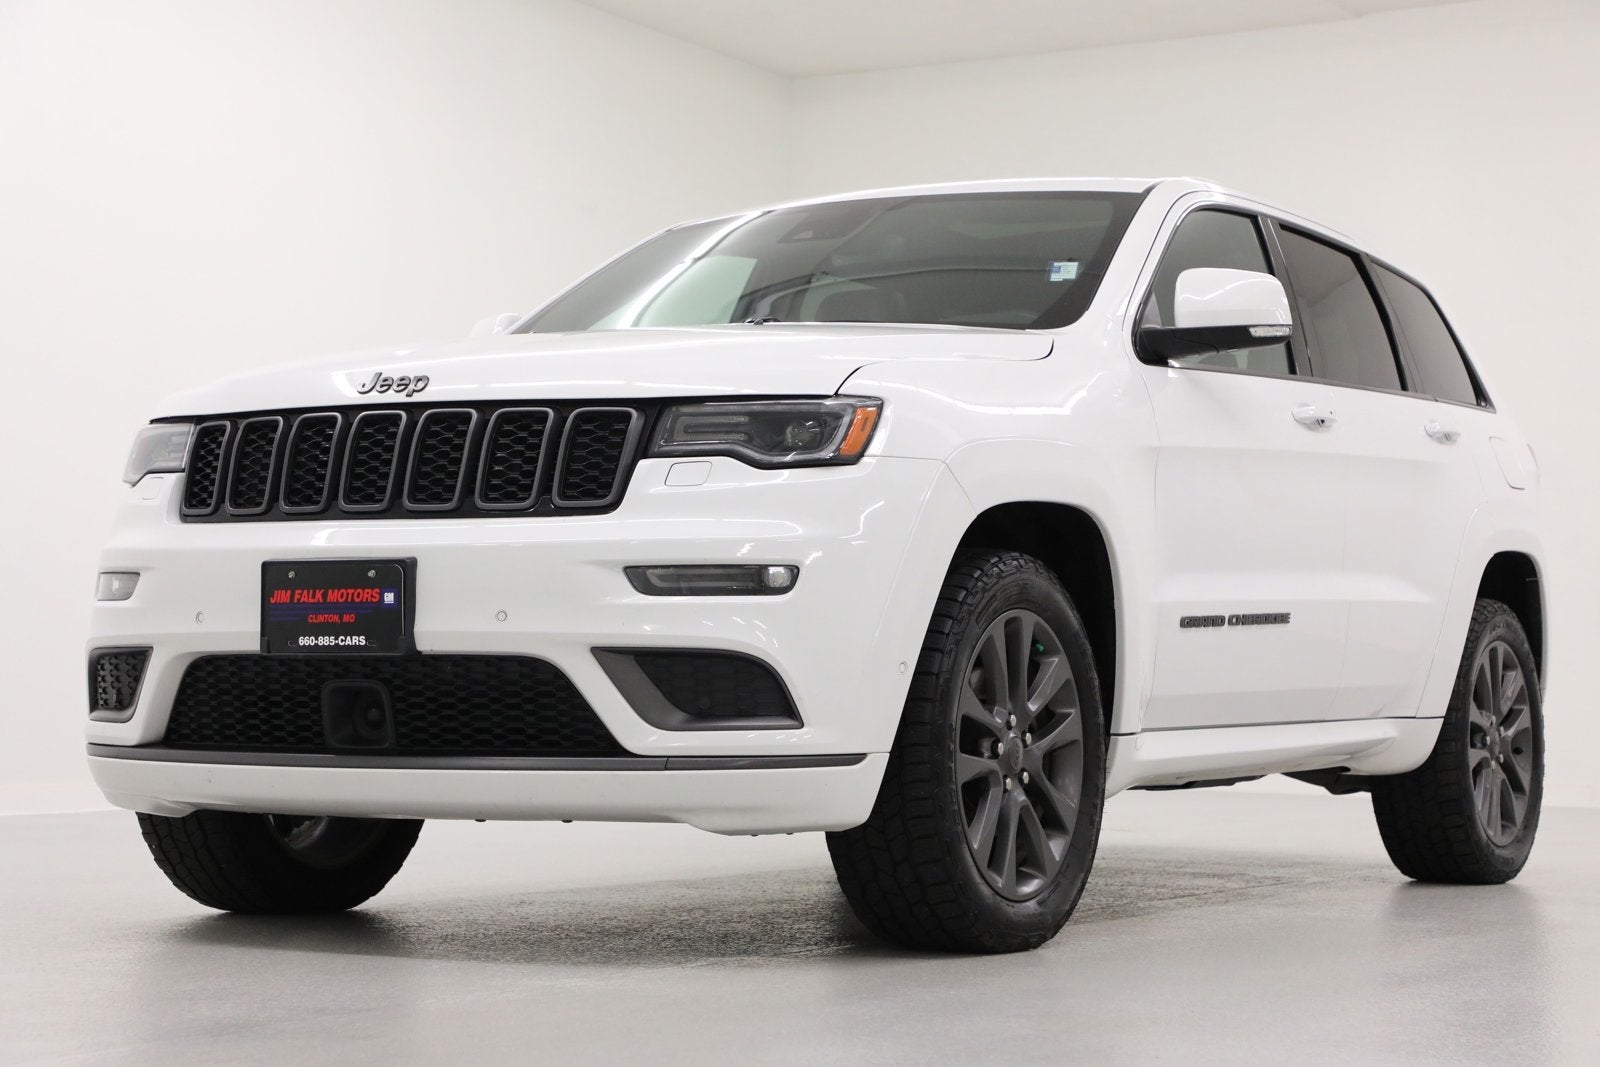 2019 Jeep Grand Cherokee High Altitude 4WD Sunroof Heated Cooled Black Leather Heated 2nd Row 20 Inch Wheels Dual Exhaust